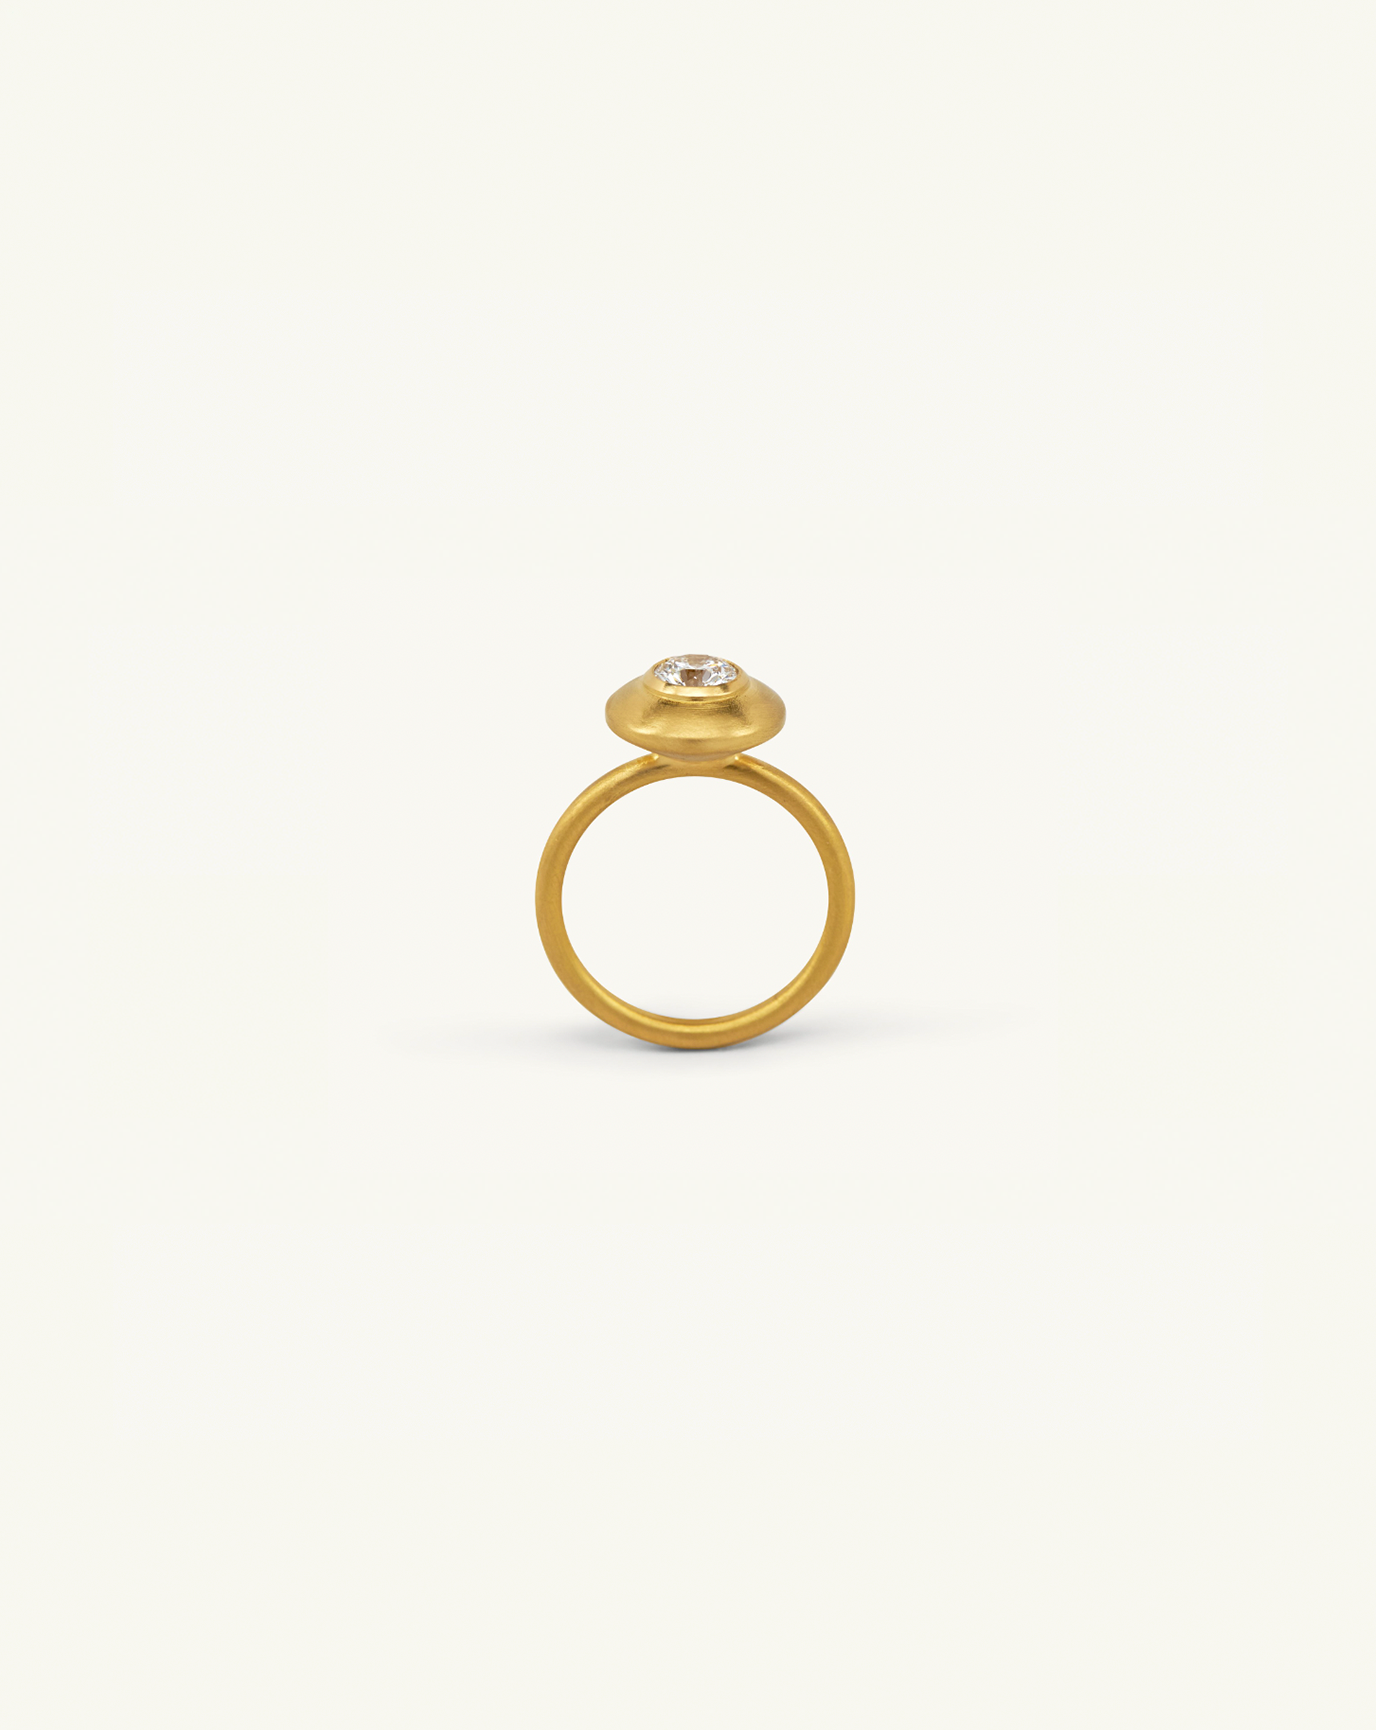 Product image of the gold pod ring with white diamond